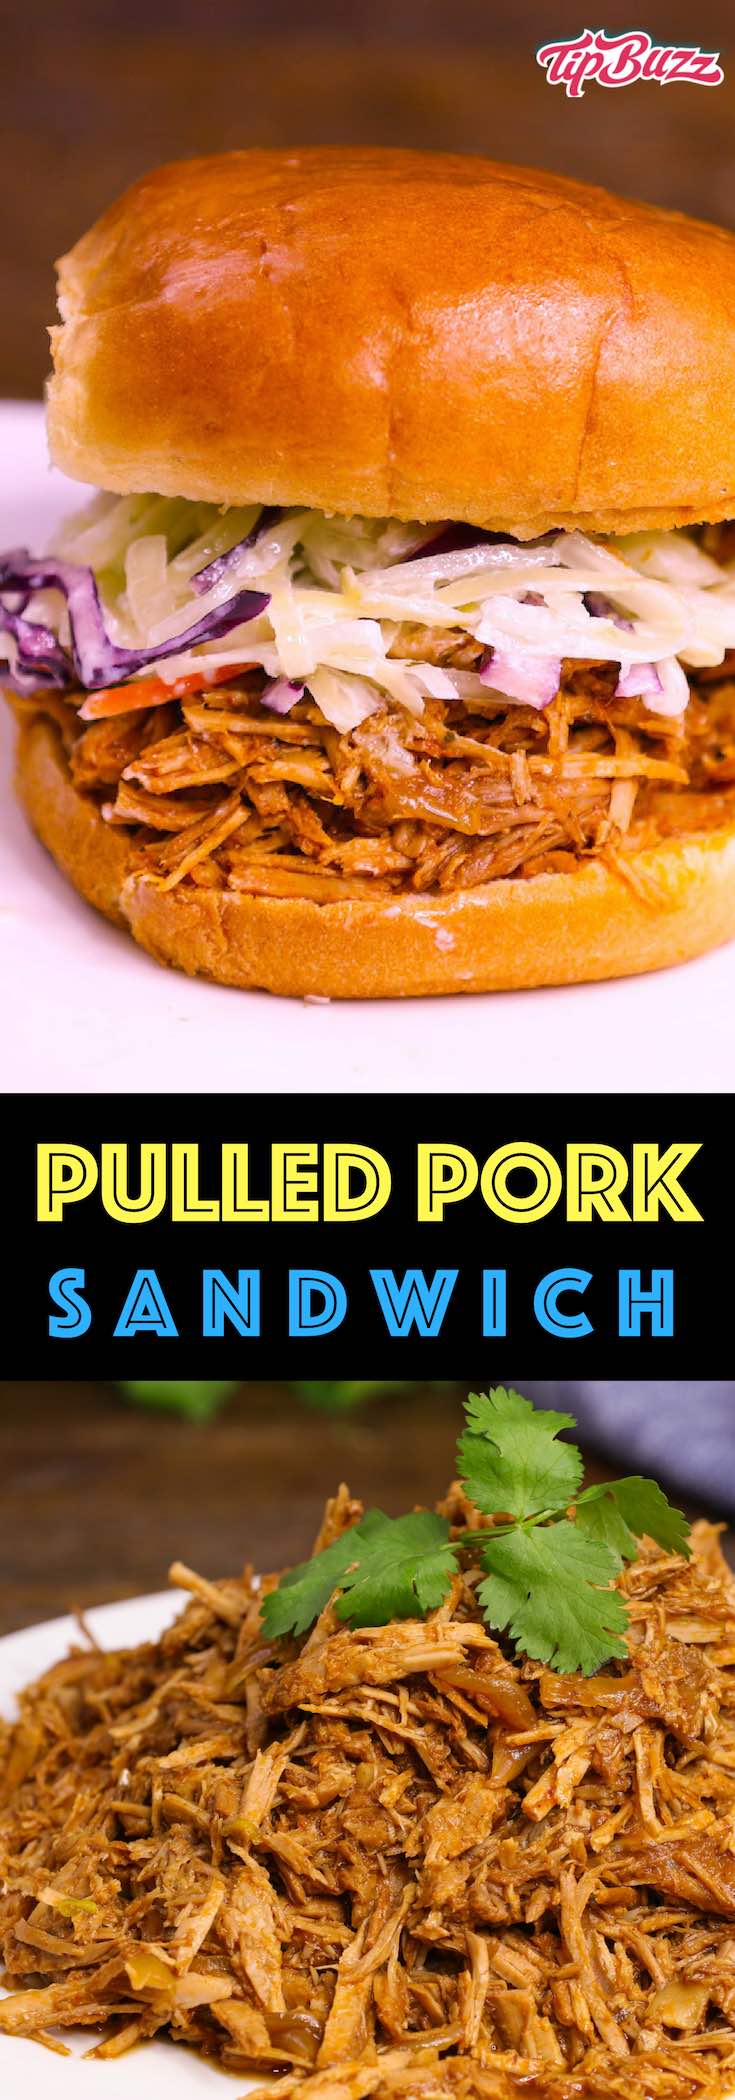 Pulled Pork Sandwich made with juicy and flavorful pork shoulder roast, smothered in a smoky and sweet barbecue sauce. Serve it on your favorite buns with coleslaw for an unforgettable meal! 